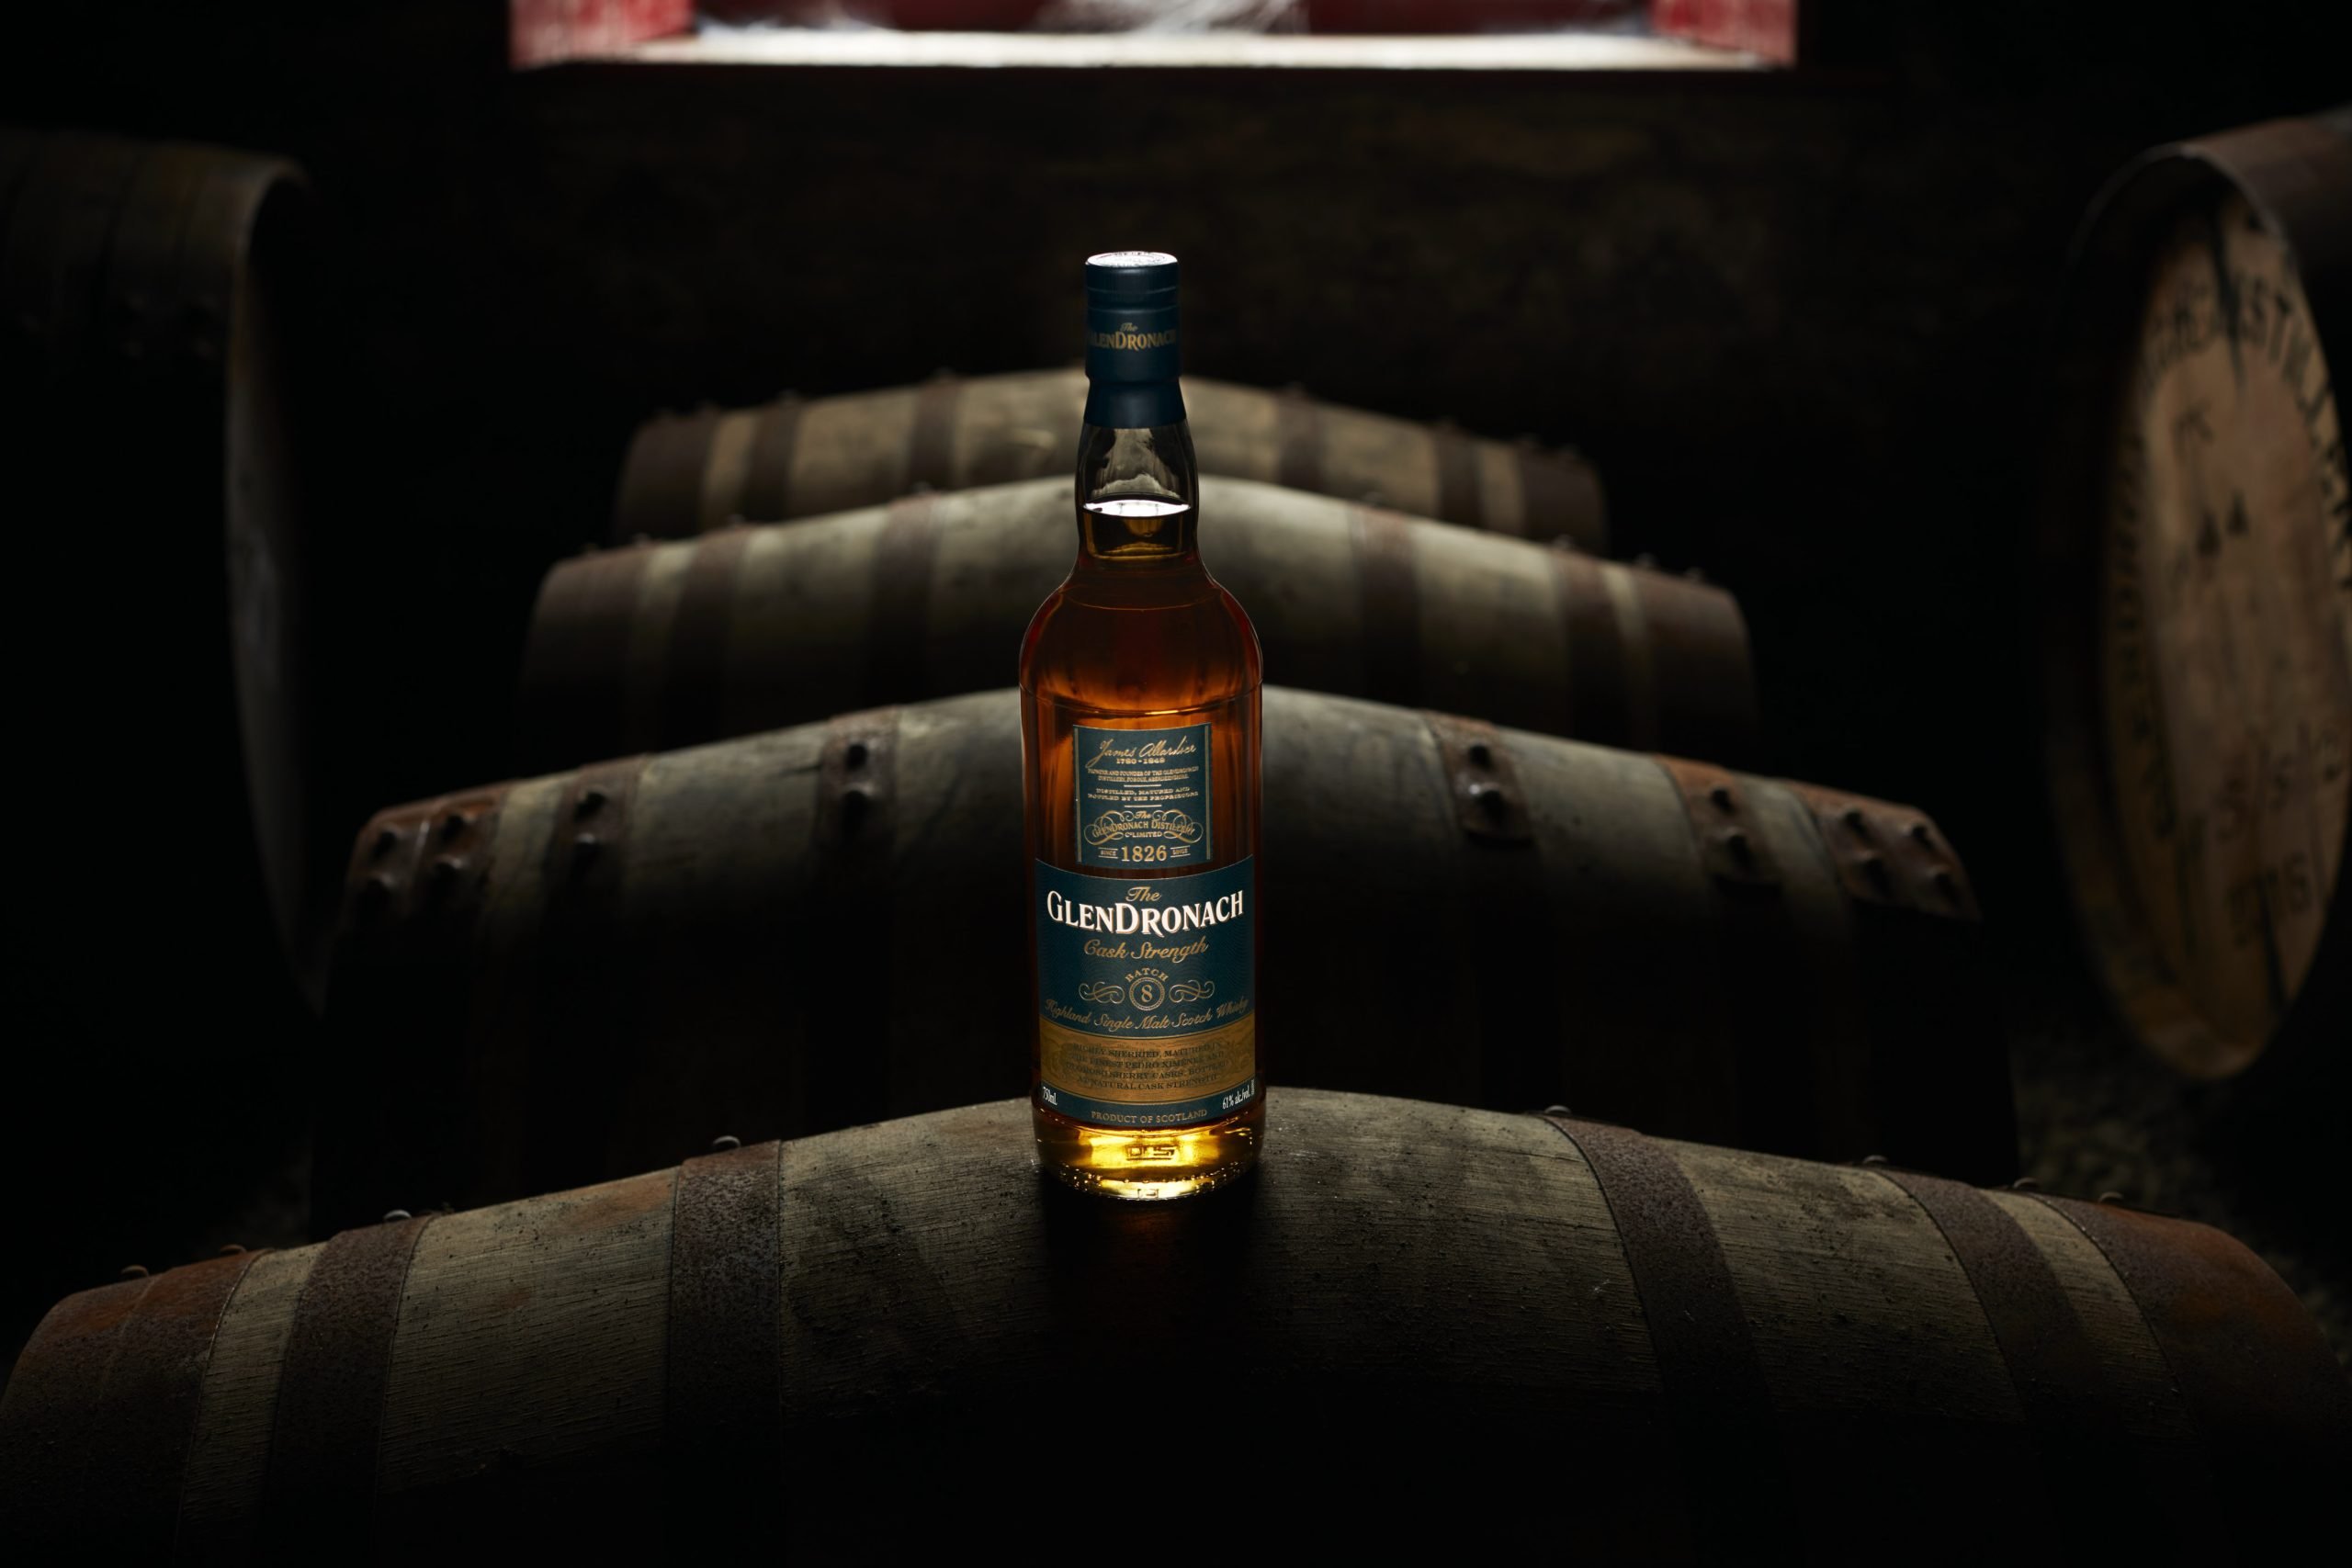 GlenDronach is aged in sherry casks giving it a full bodied, rich flavoring. Photo courtesy of GlenDronach